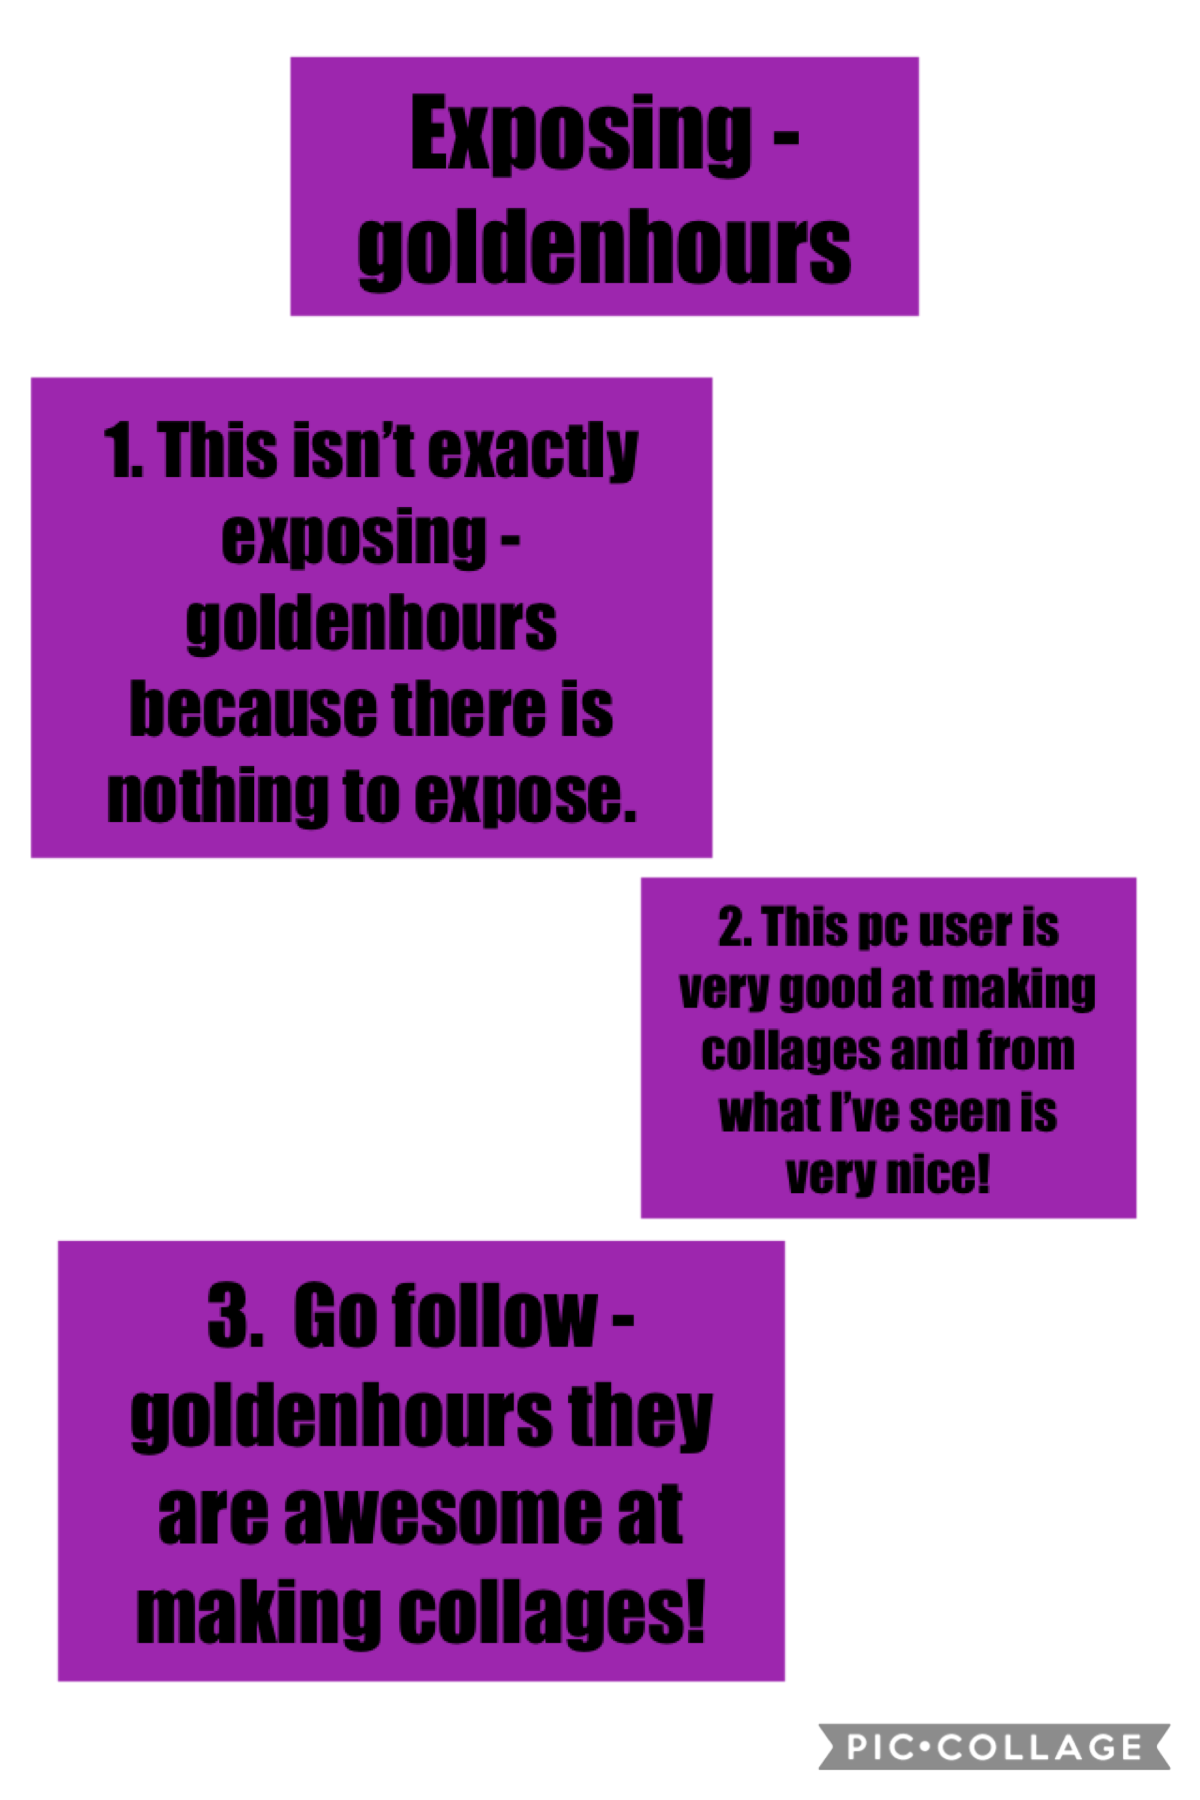 Tap for info

I know -goldenhours wanted to be exposed but they are too nice and have a good presence in pc!
Thank you
-Get_Exposed